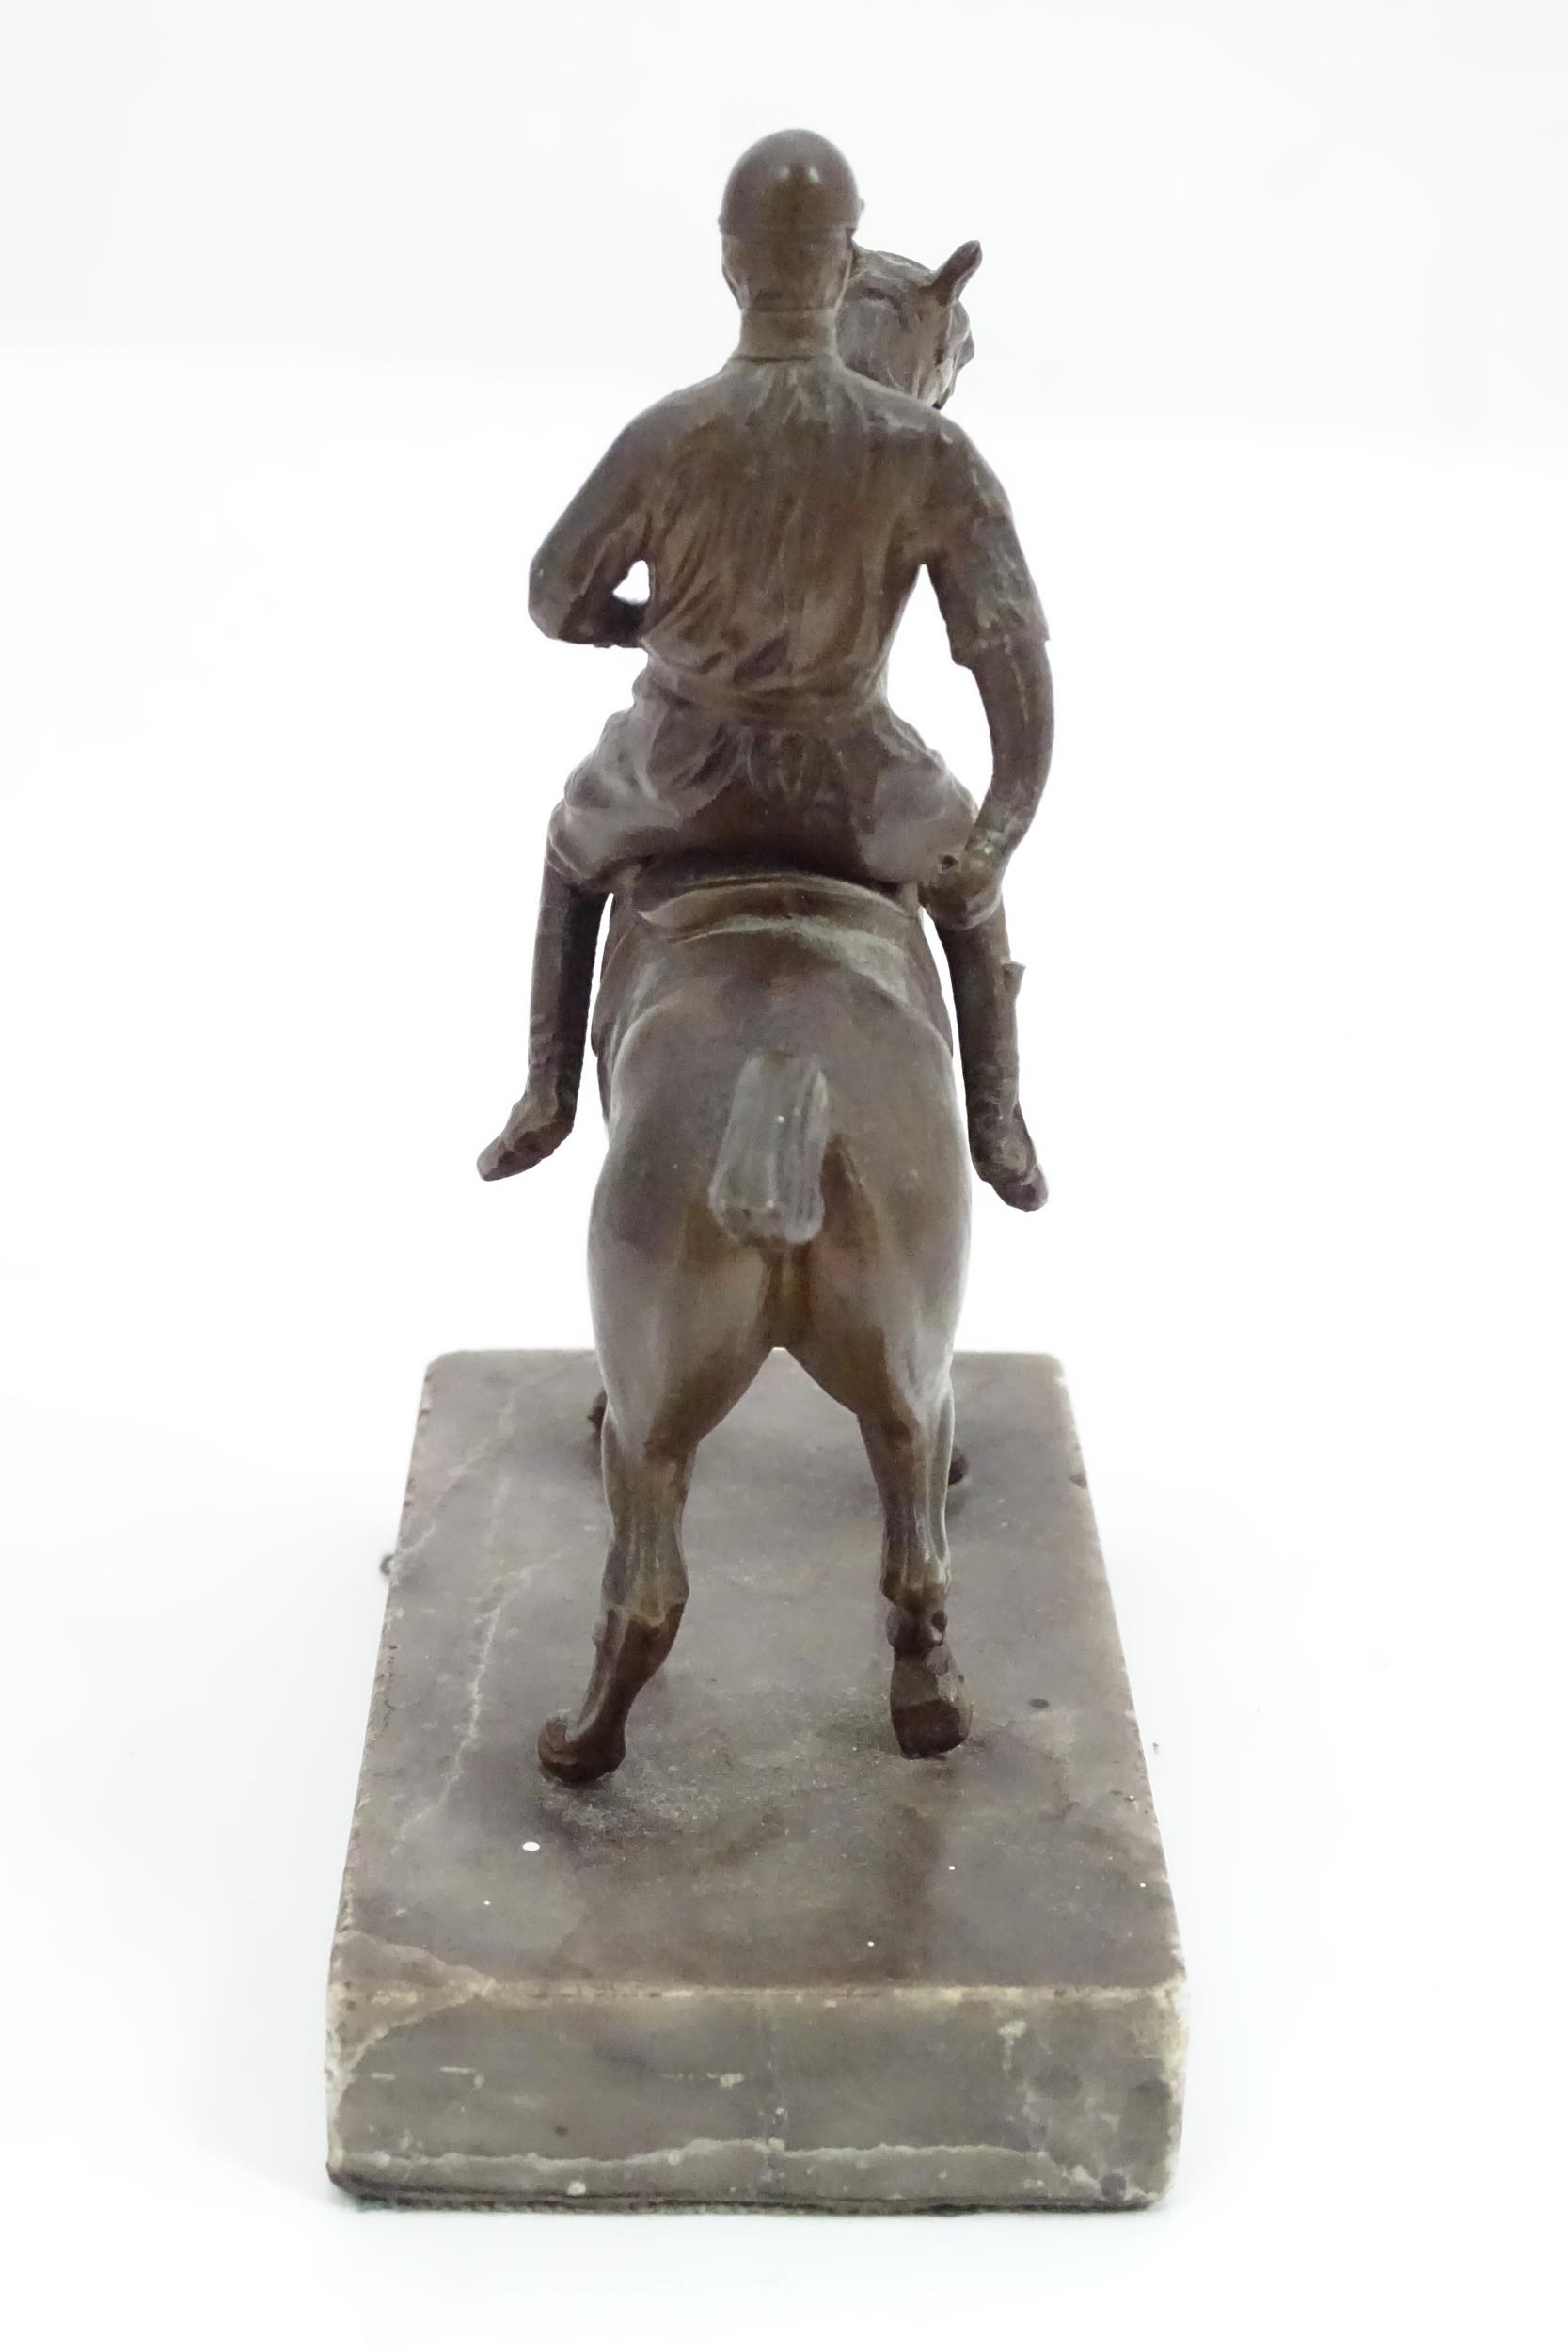 A 20thC cast sculpture modelled as a jockey on horseback, upon a marble base. Approx. 5 1/2" high - Image 4 of 5